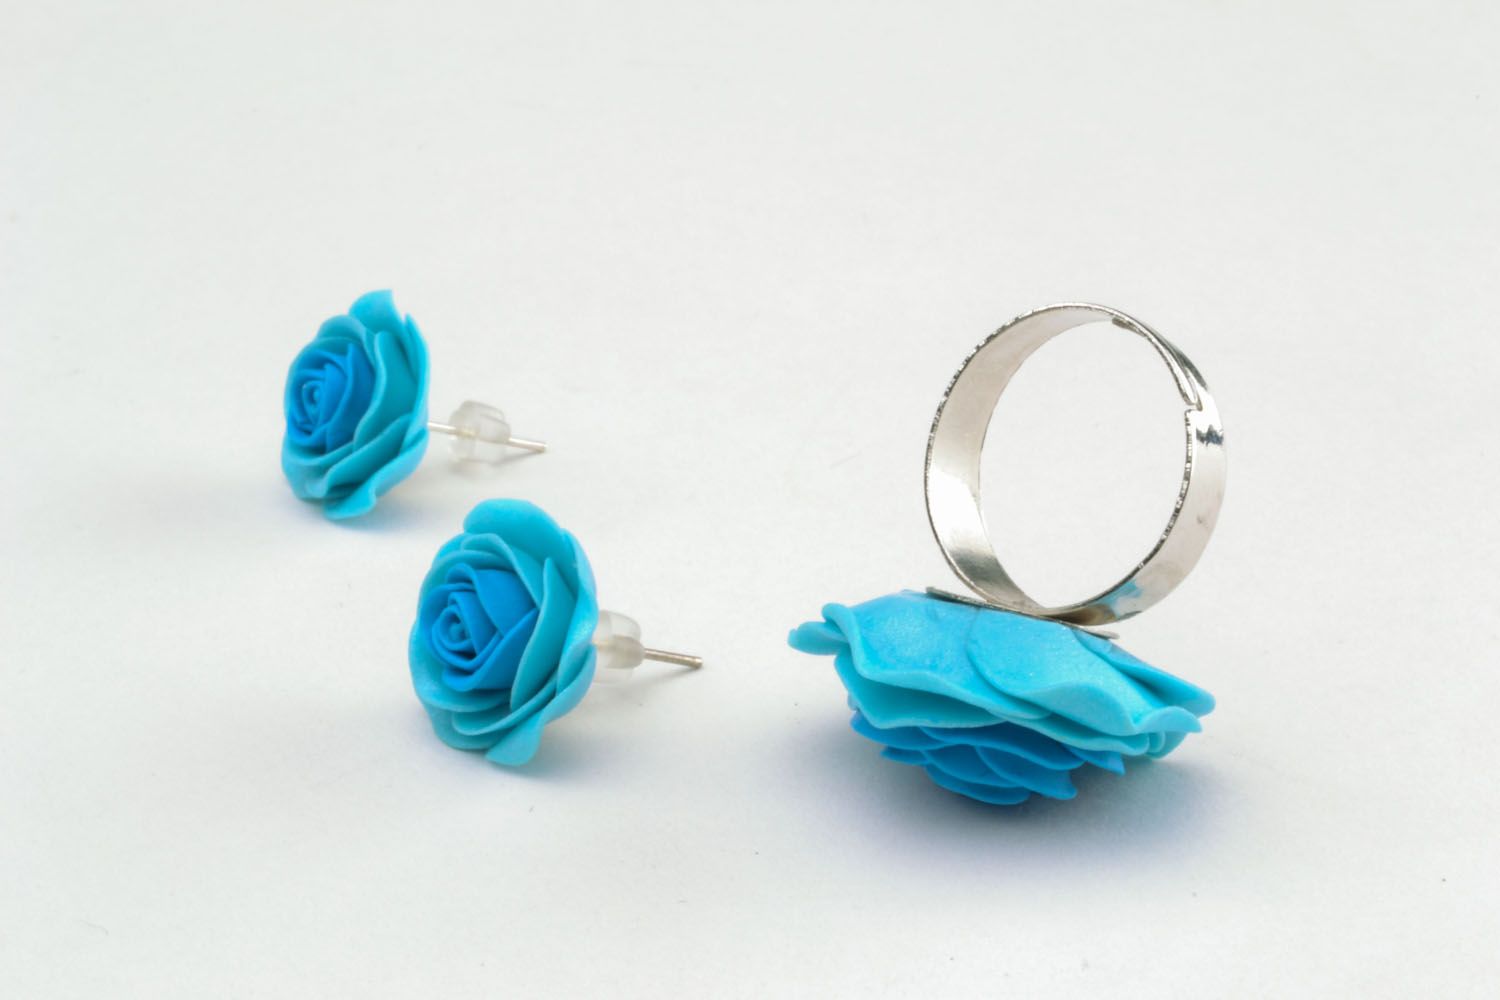 Homemade ring and earrings in the shape of blue roses photo 5